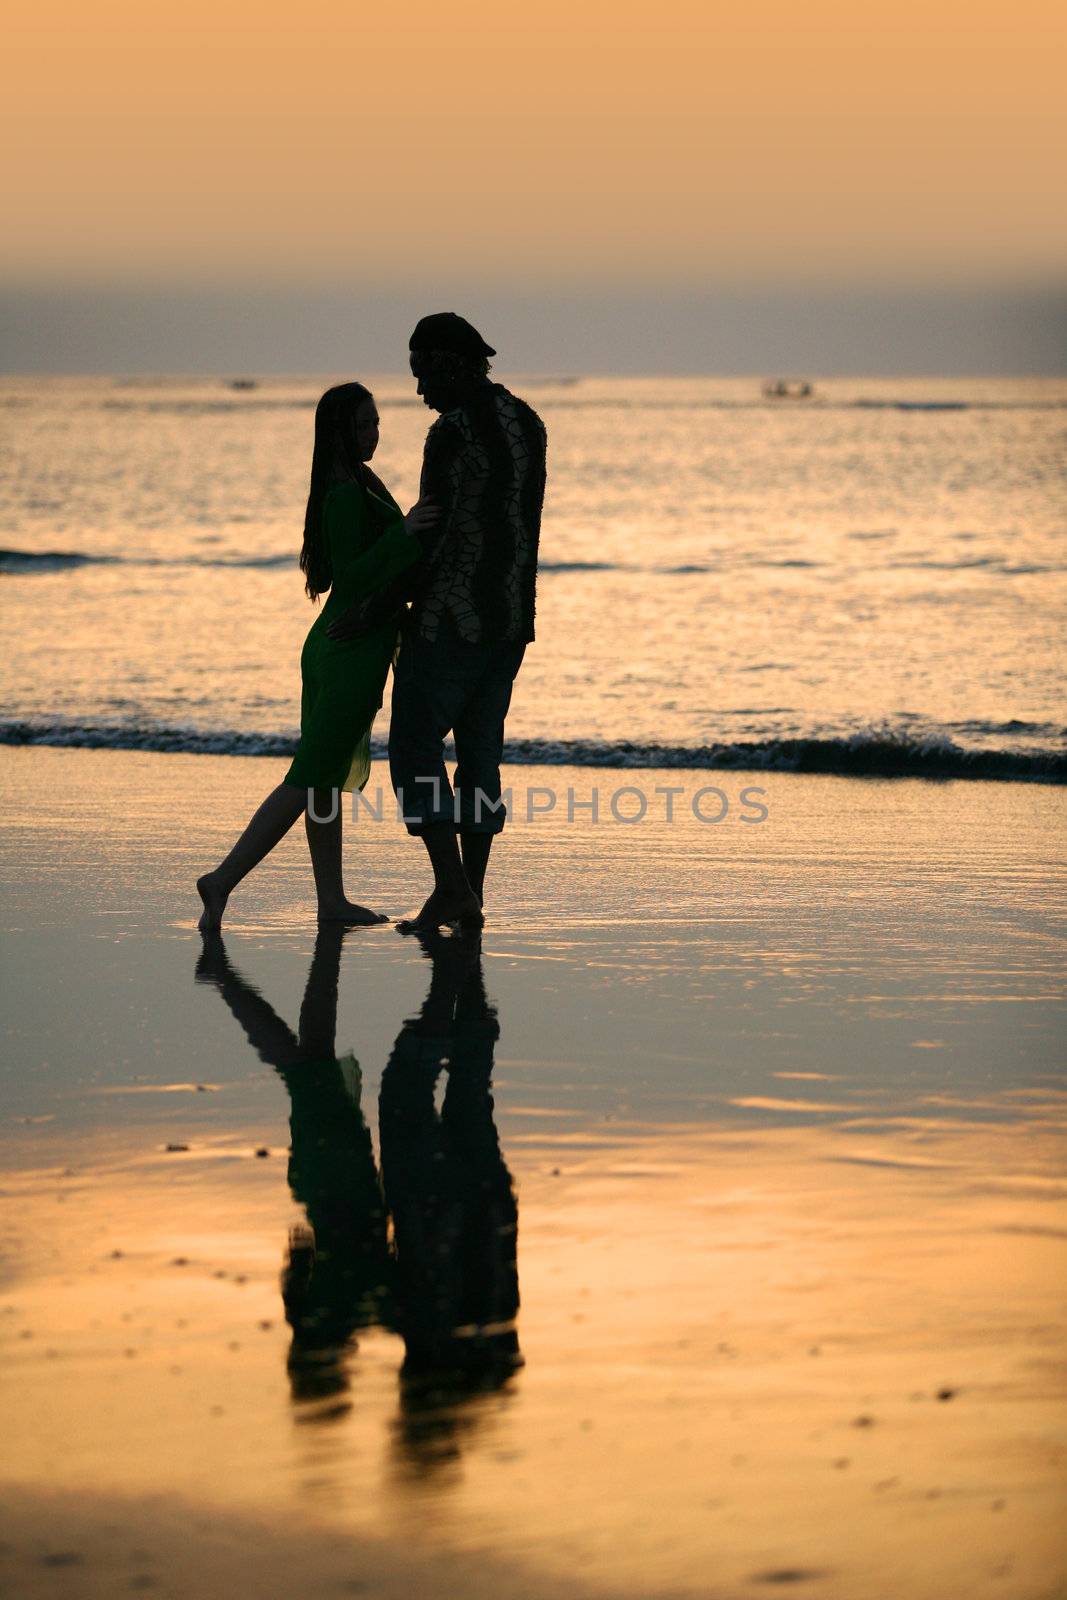 Couple on sunset. Coast of the Indian ocean